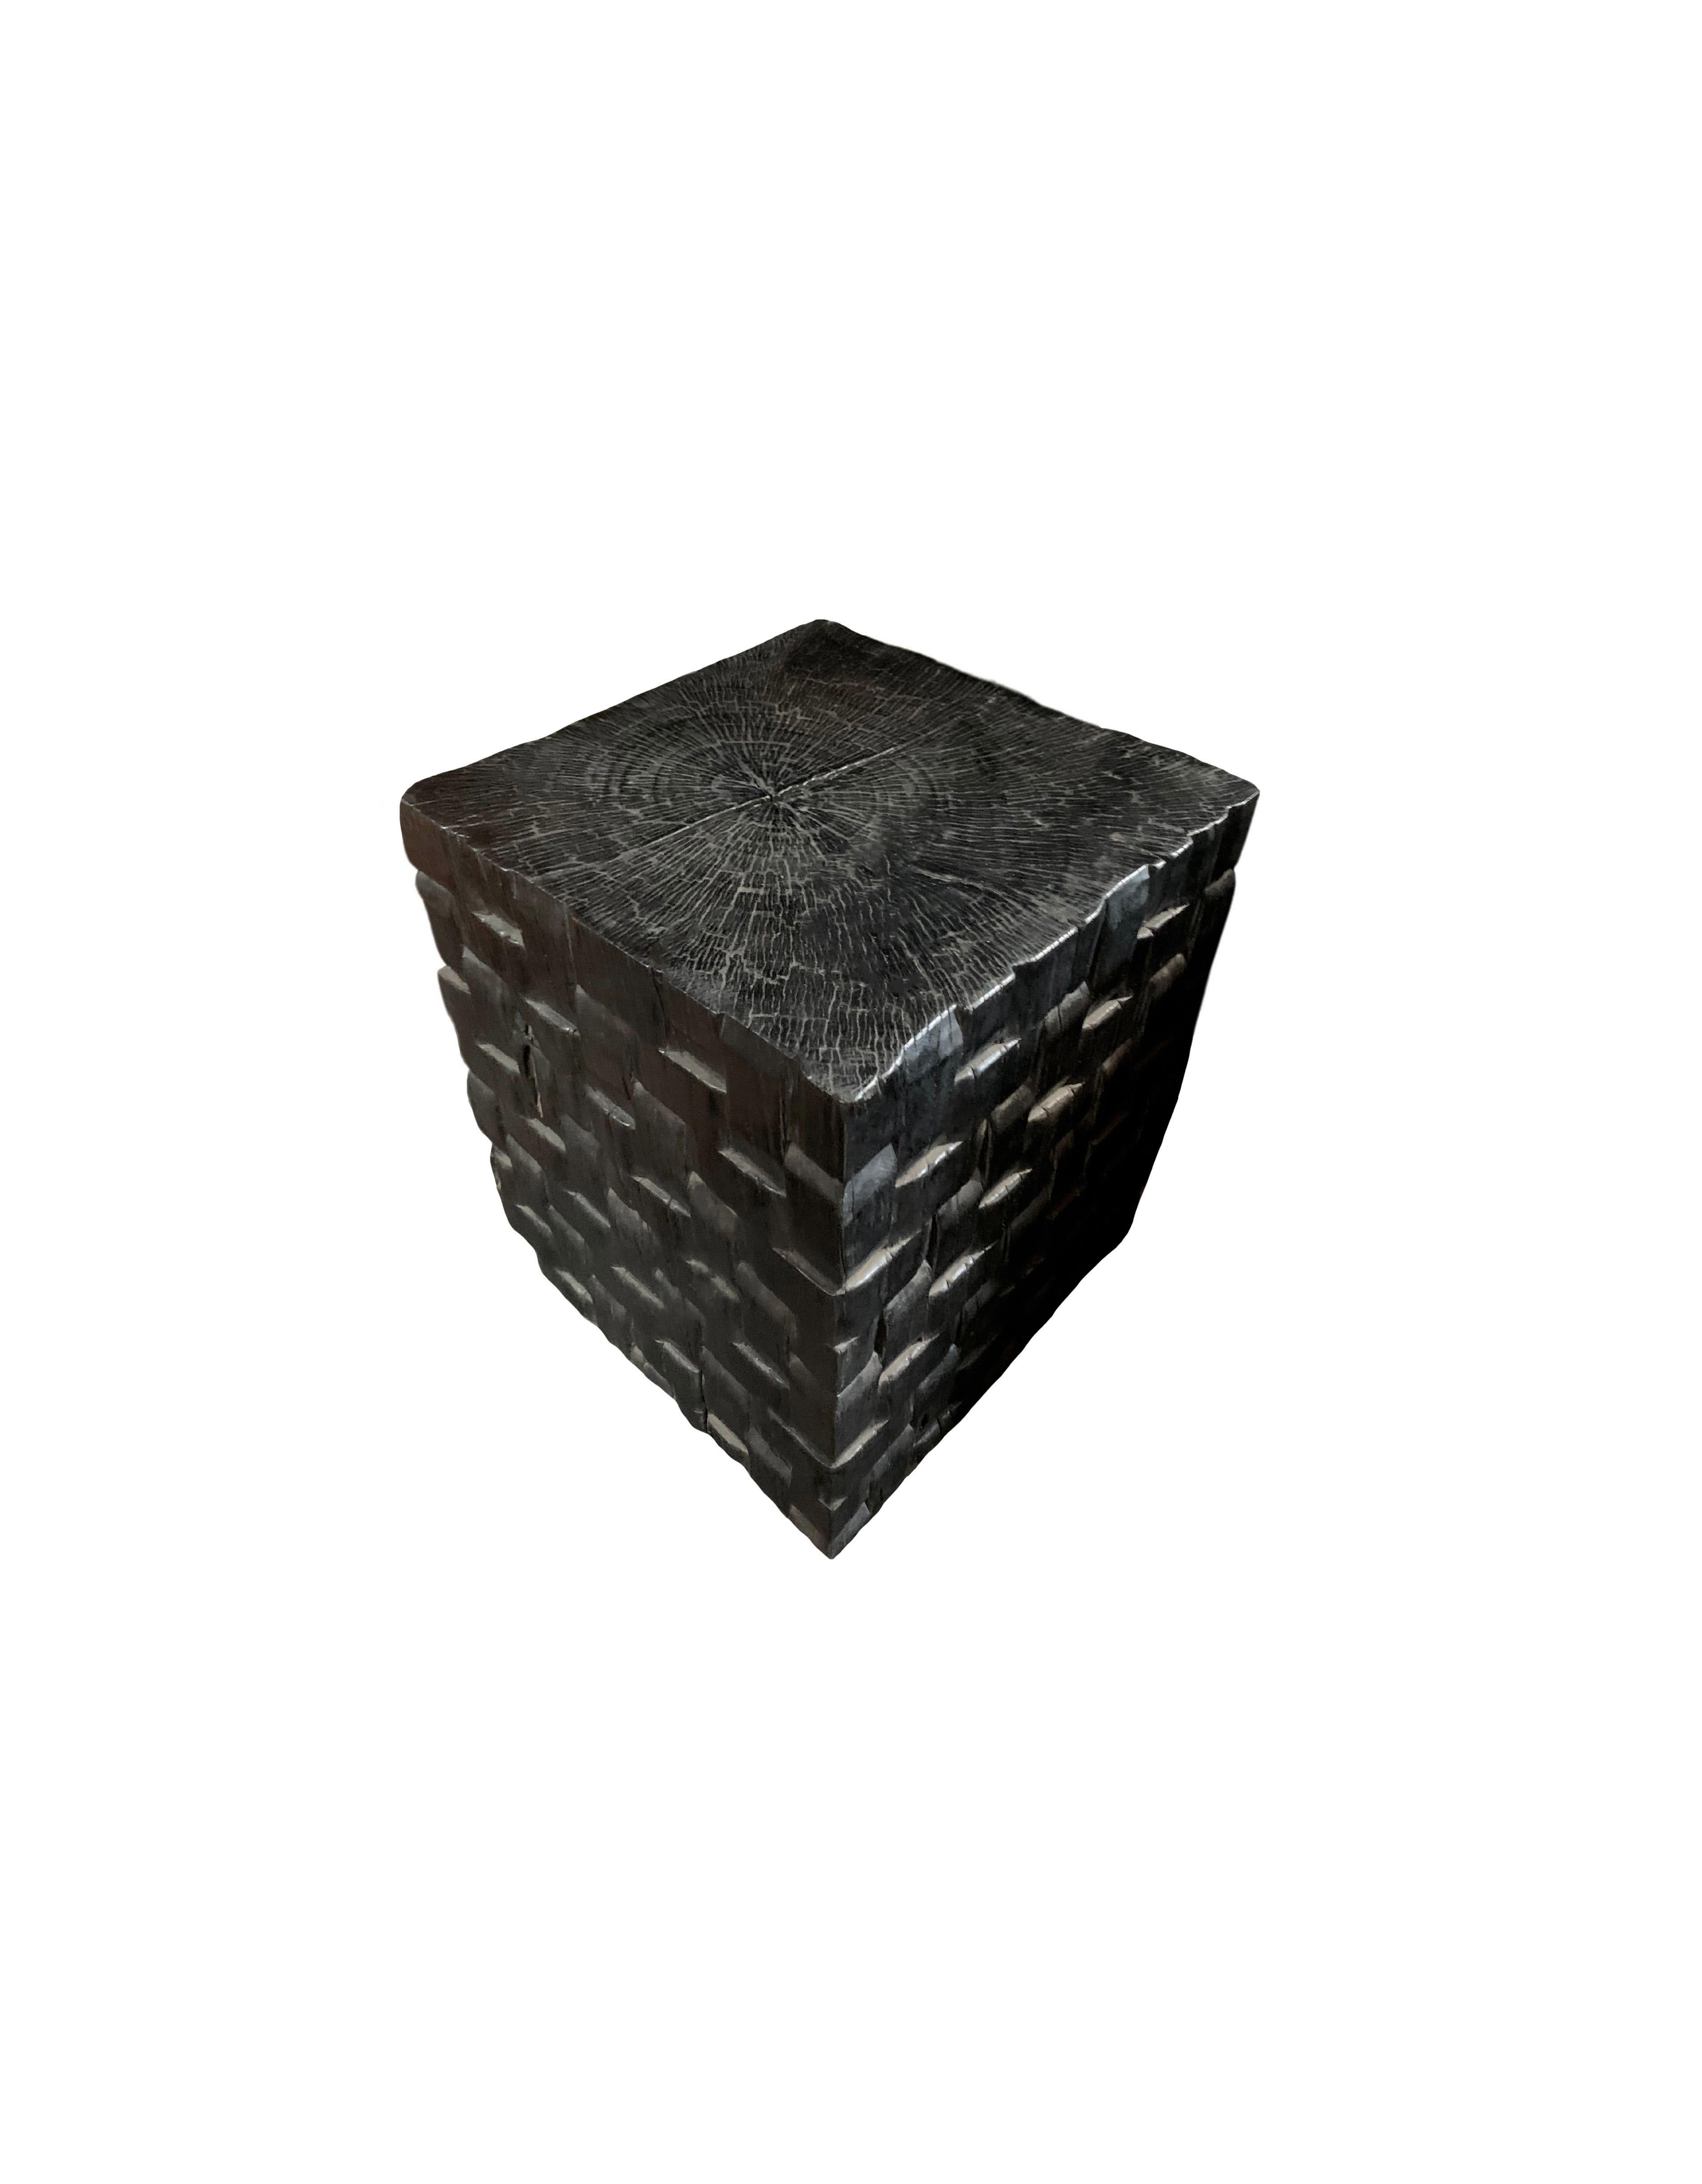 Organic Modern Sculptural Side Table Crafted from Mango Wood For Sale